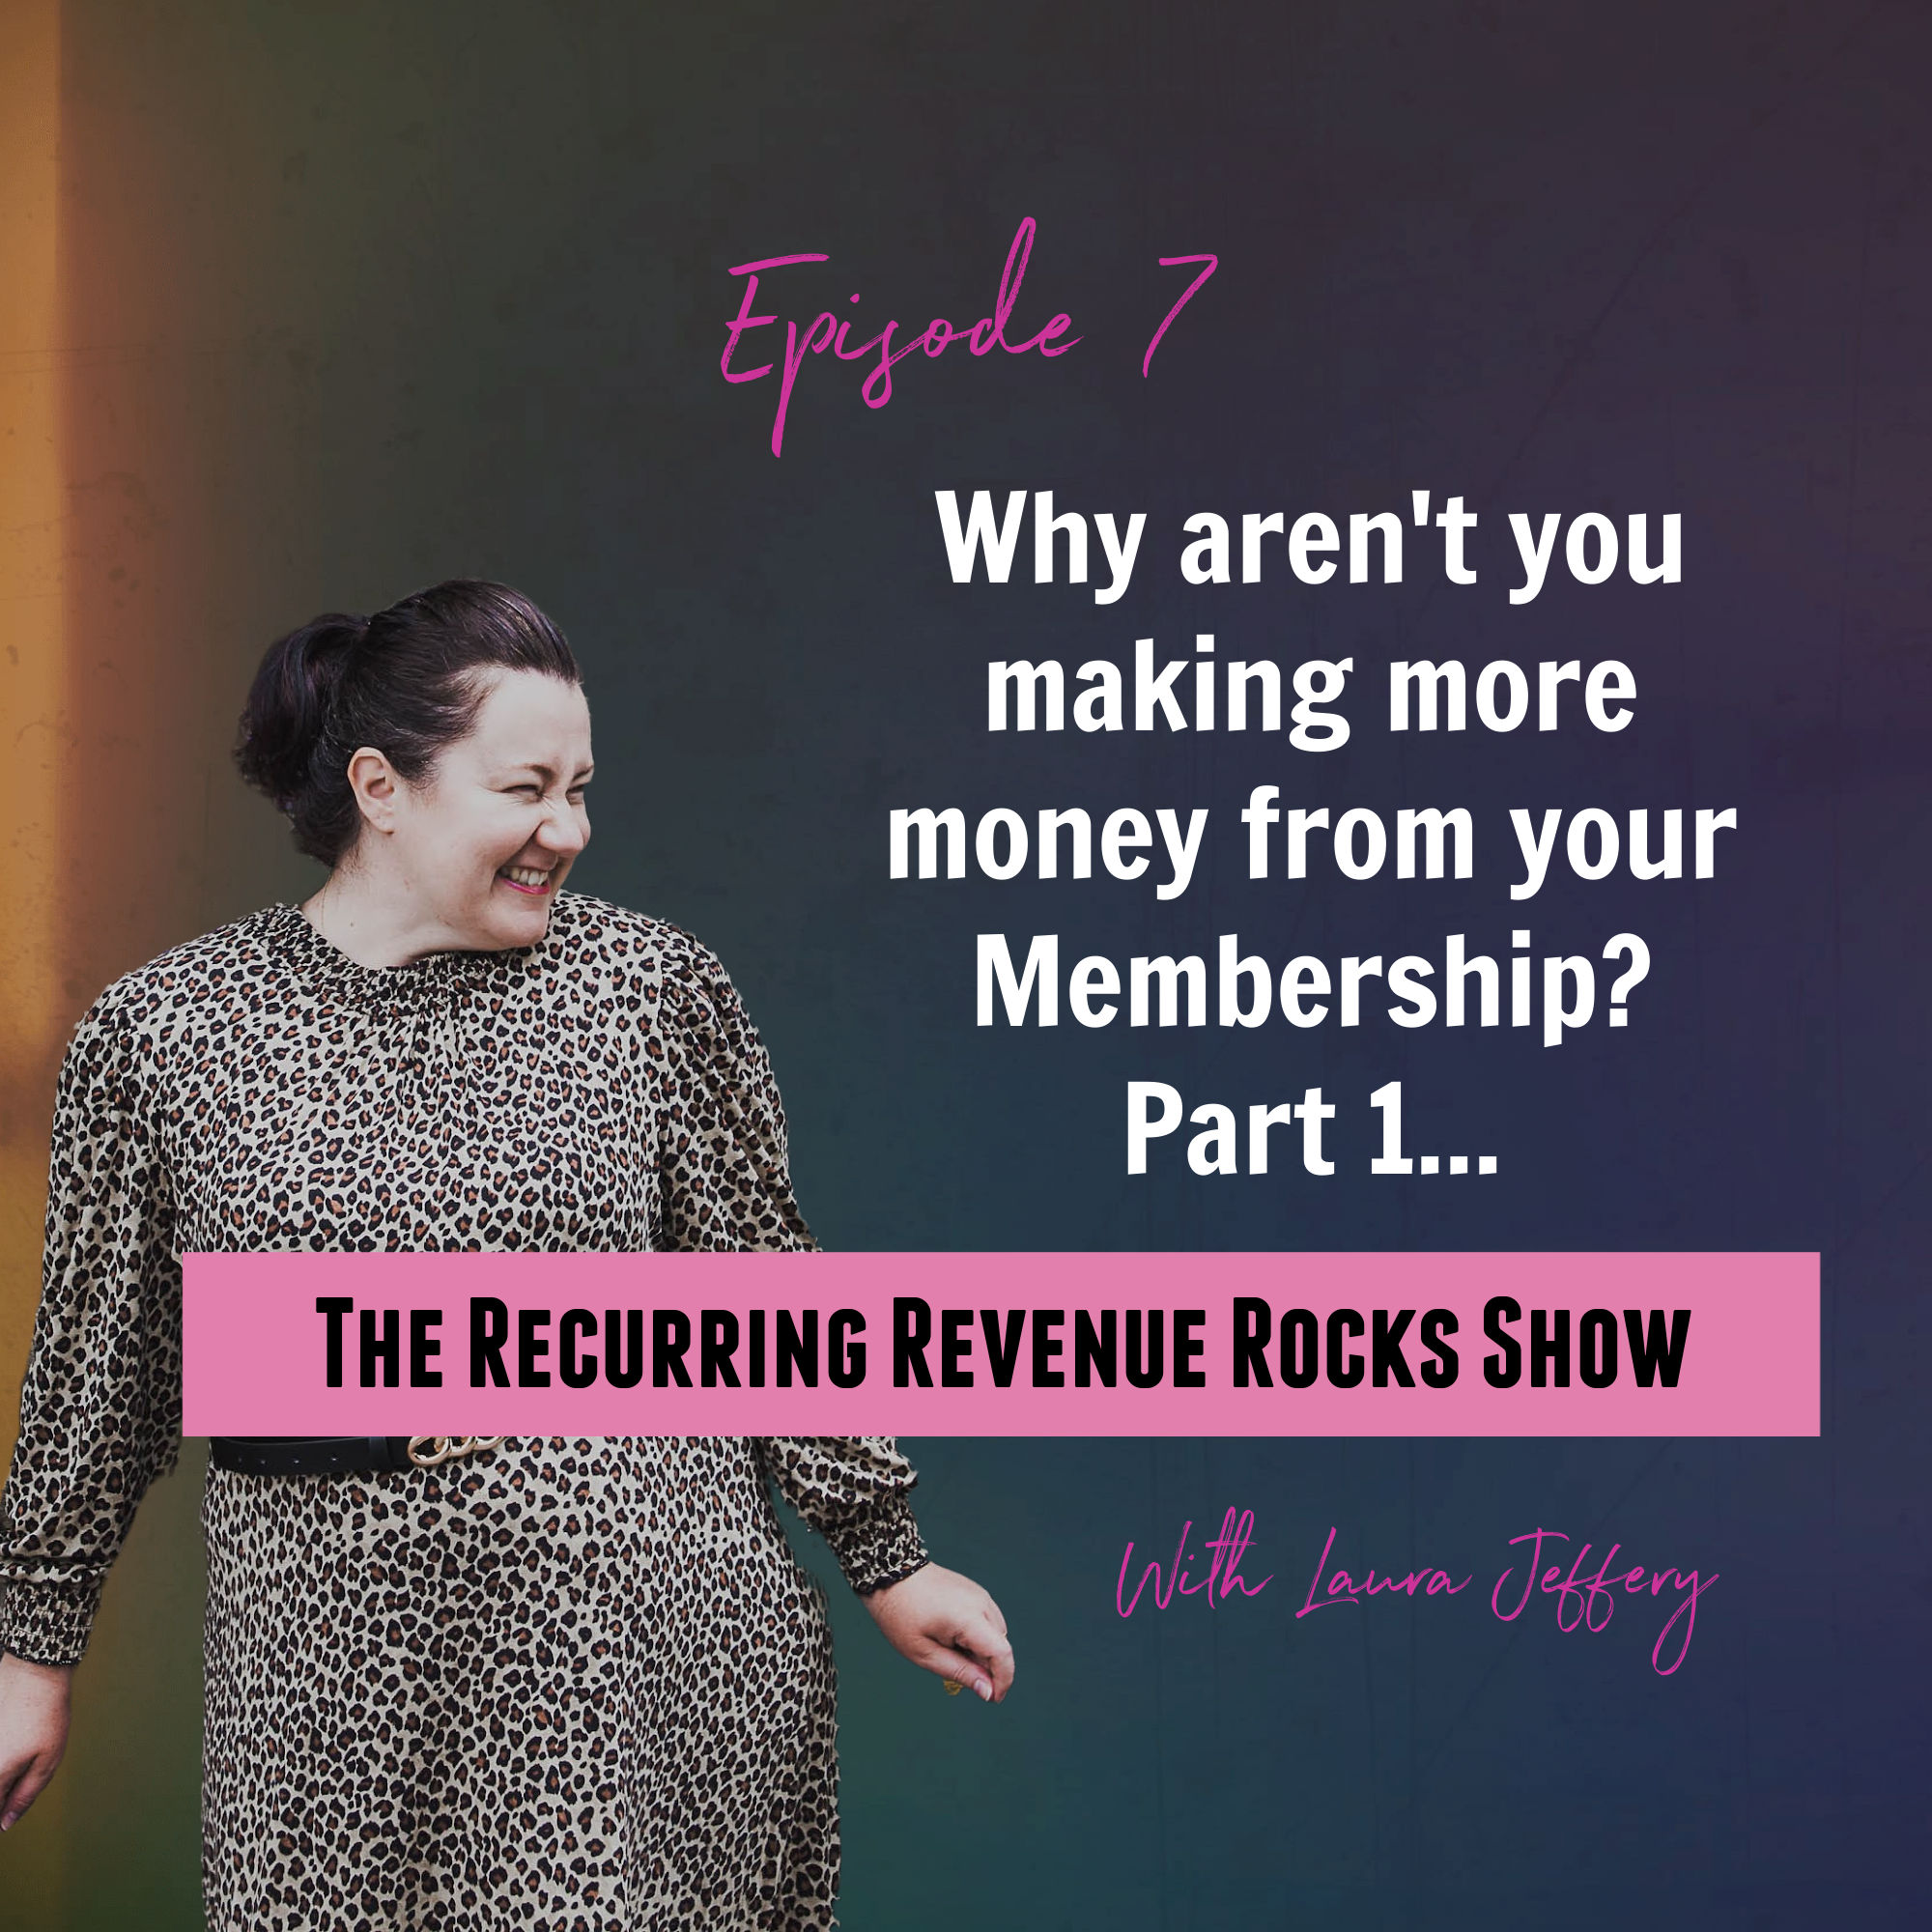 Why you aren’t making more money from your Online Membership Part 1